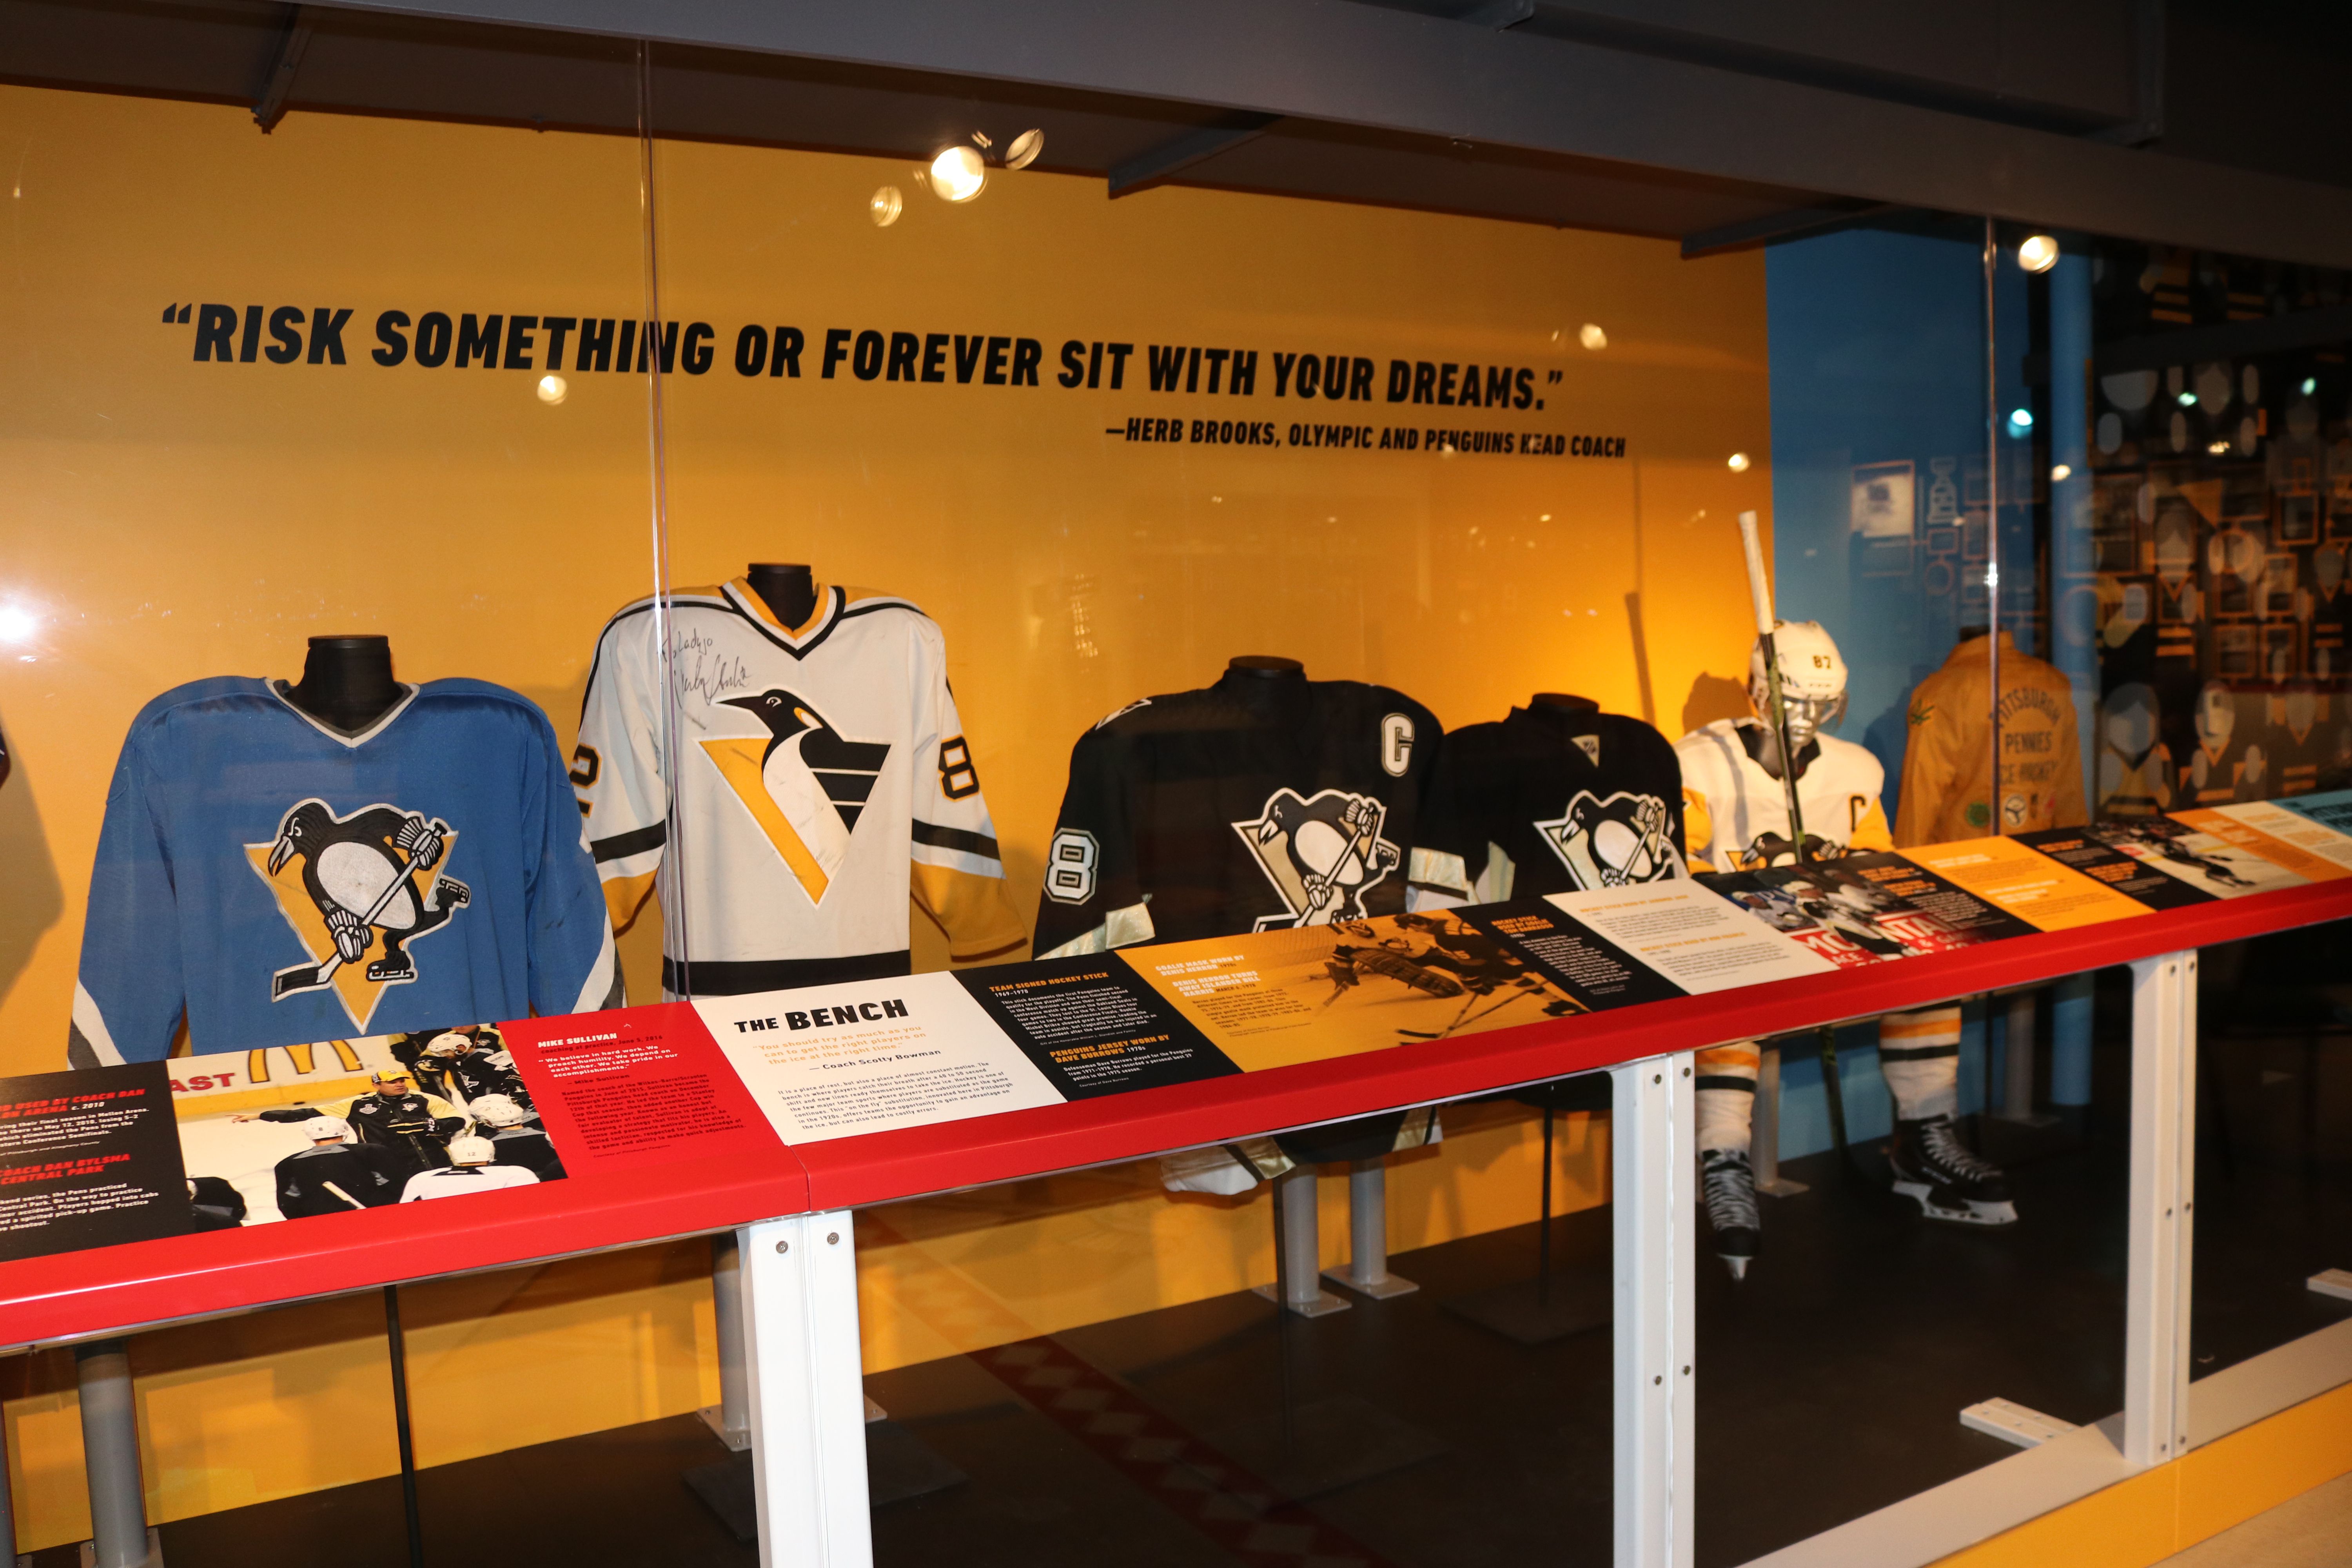 A Great Day for Hockey! - Heinz History Center